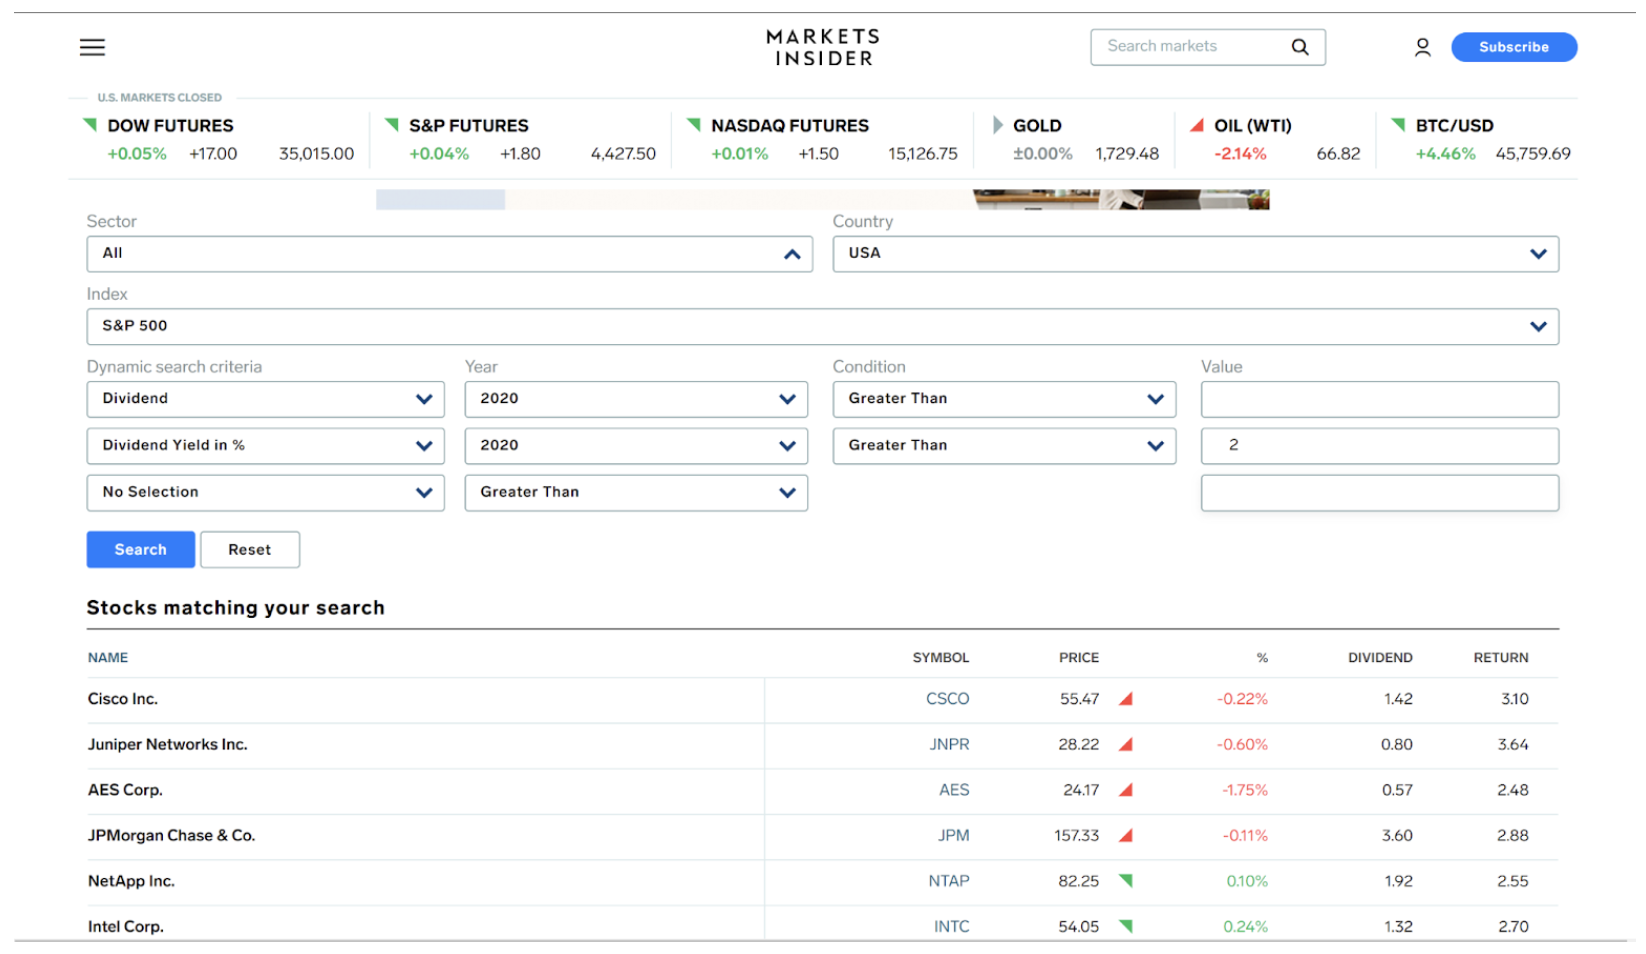 Image of a stock screener from Markets Insider